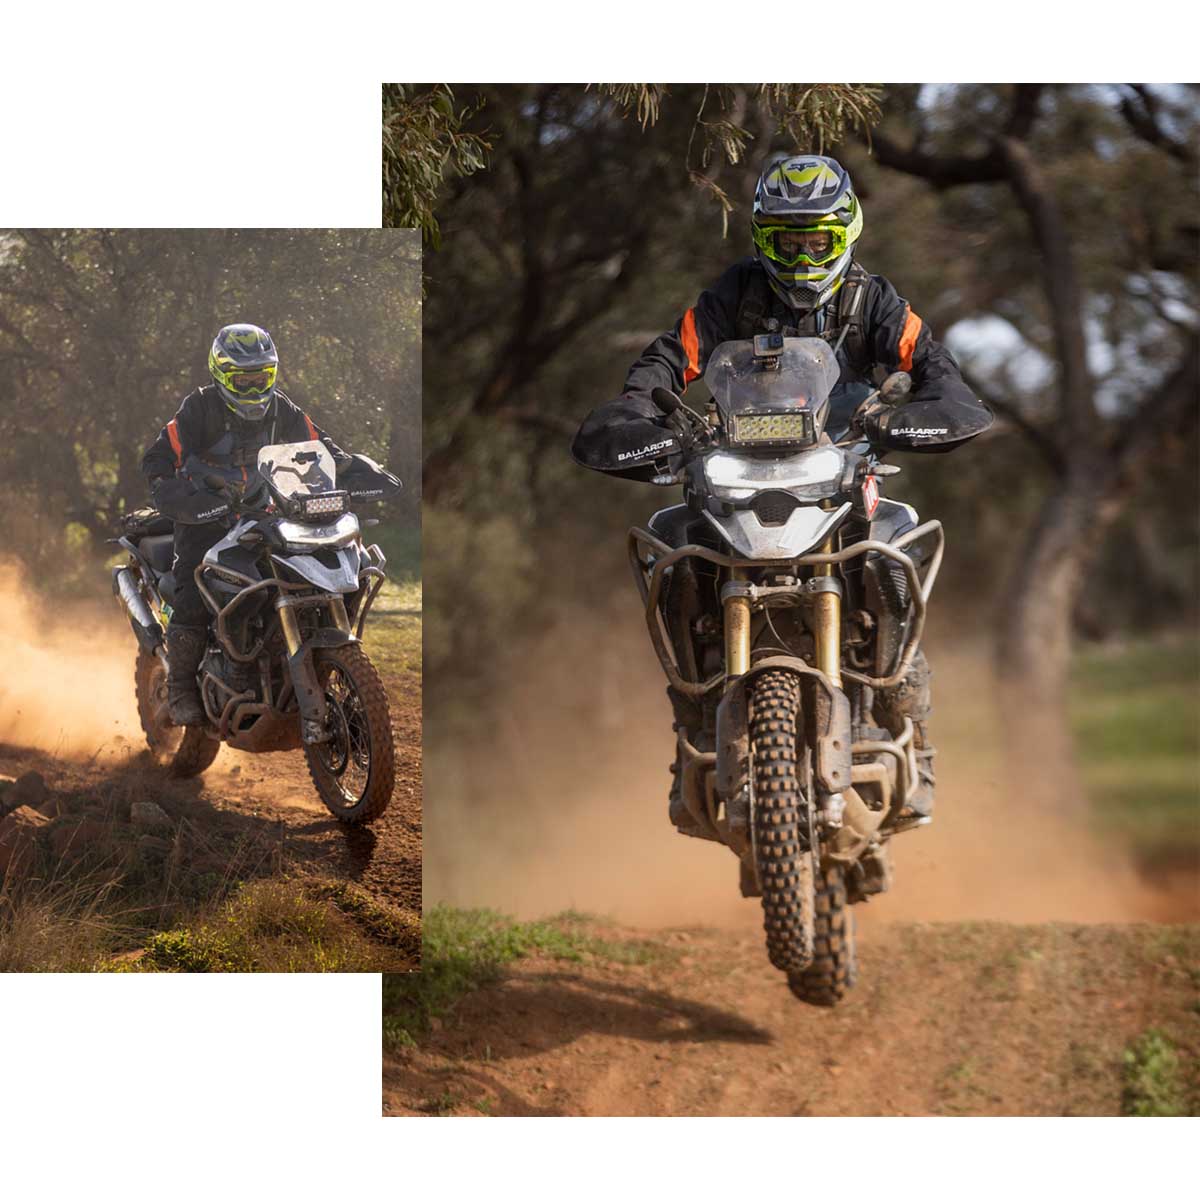 Action shots of Tiger 1200 Rally Pro